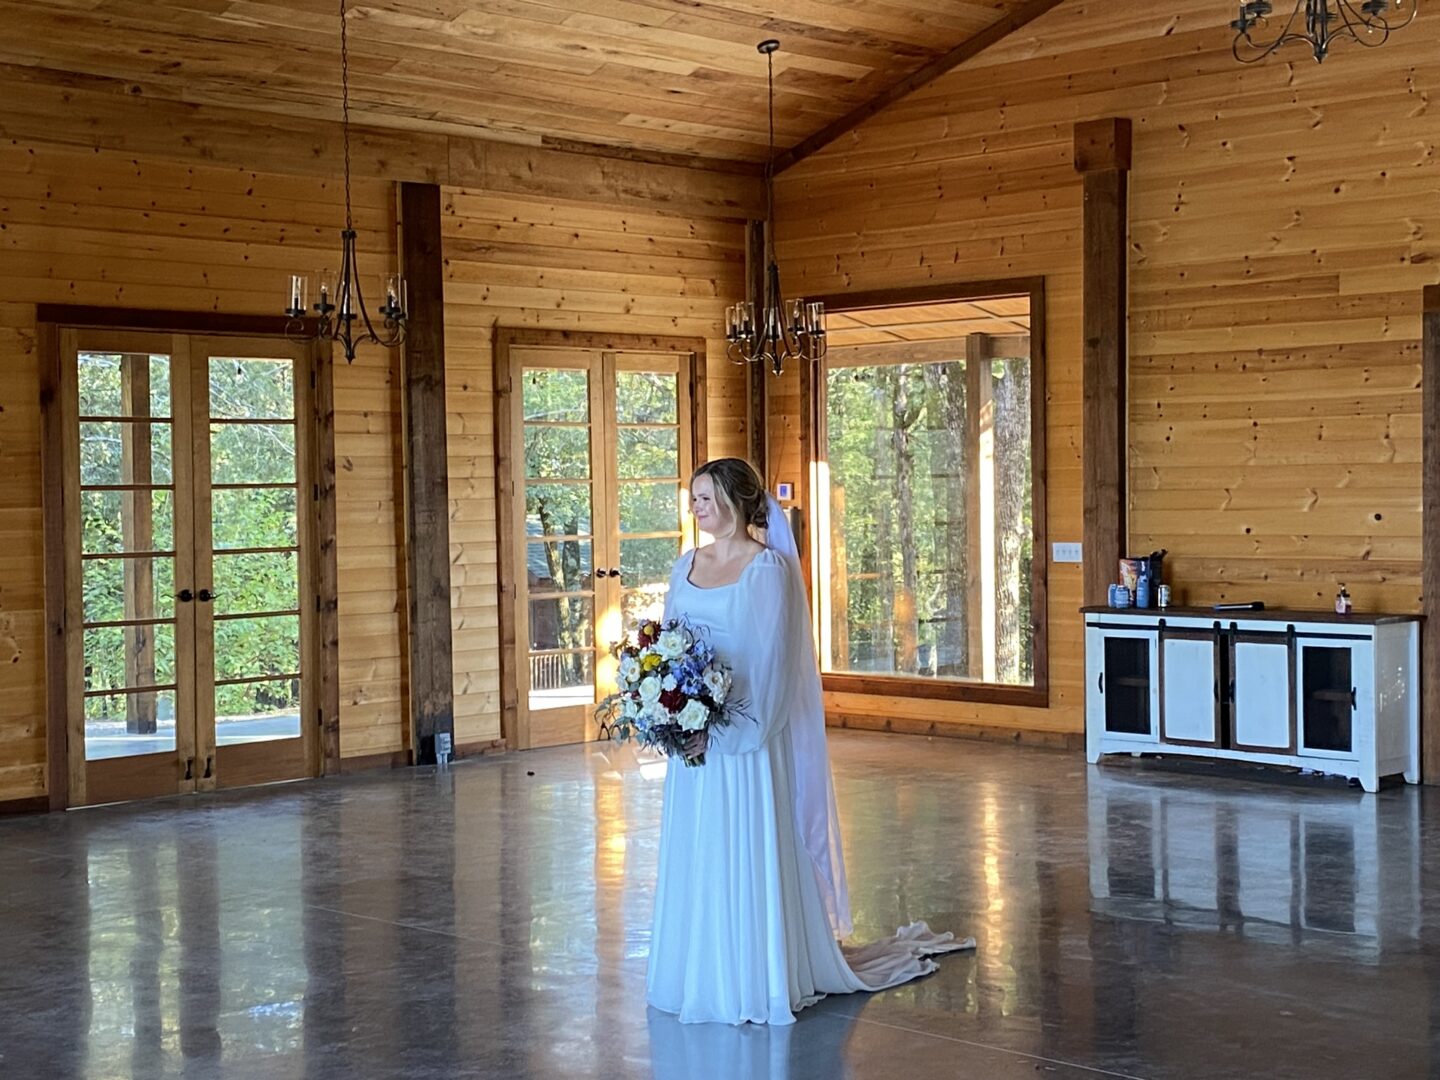 A bride in her wedding dress standing inside of a room.